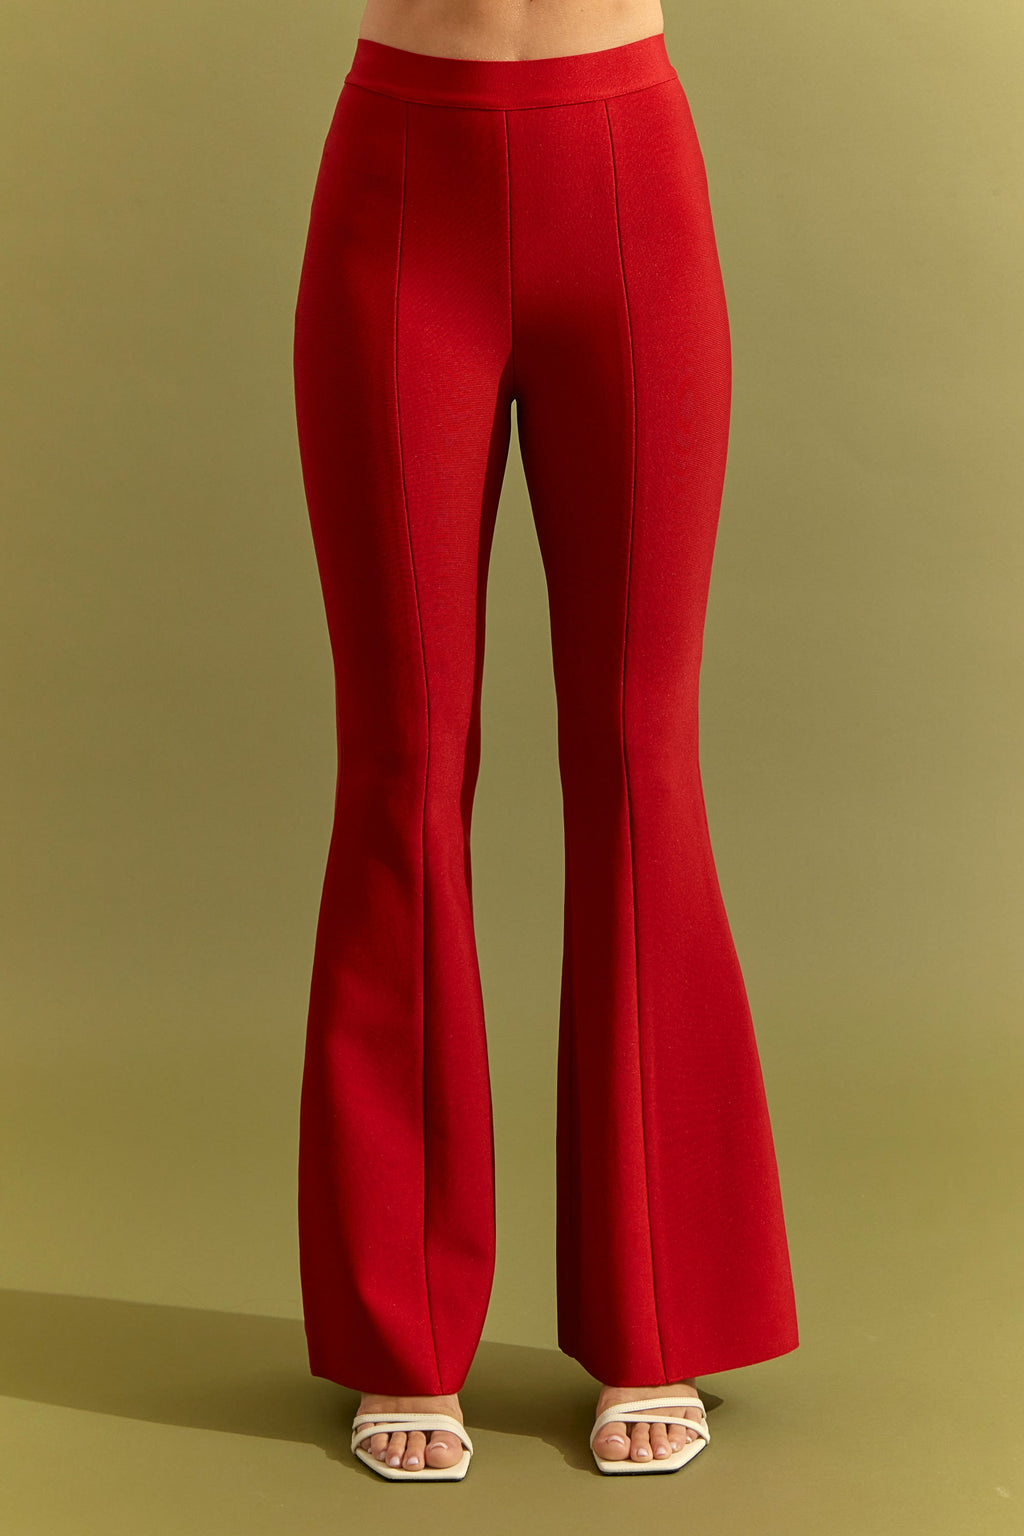 RED PANTS (set sold separately)